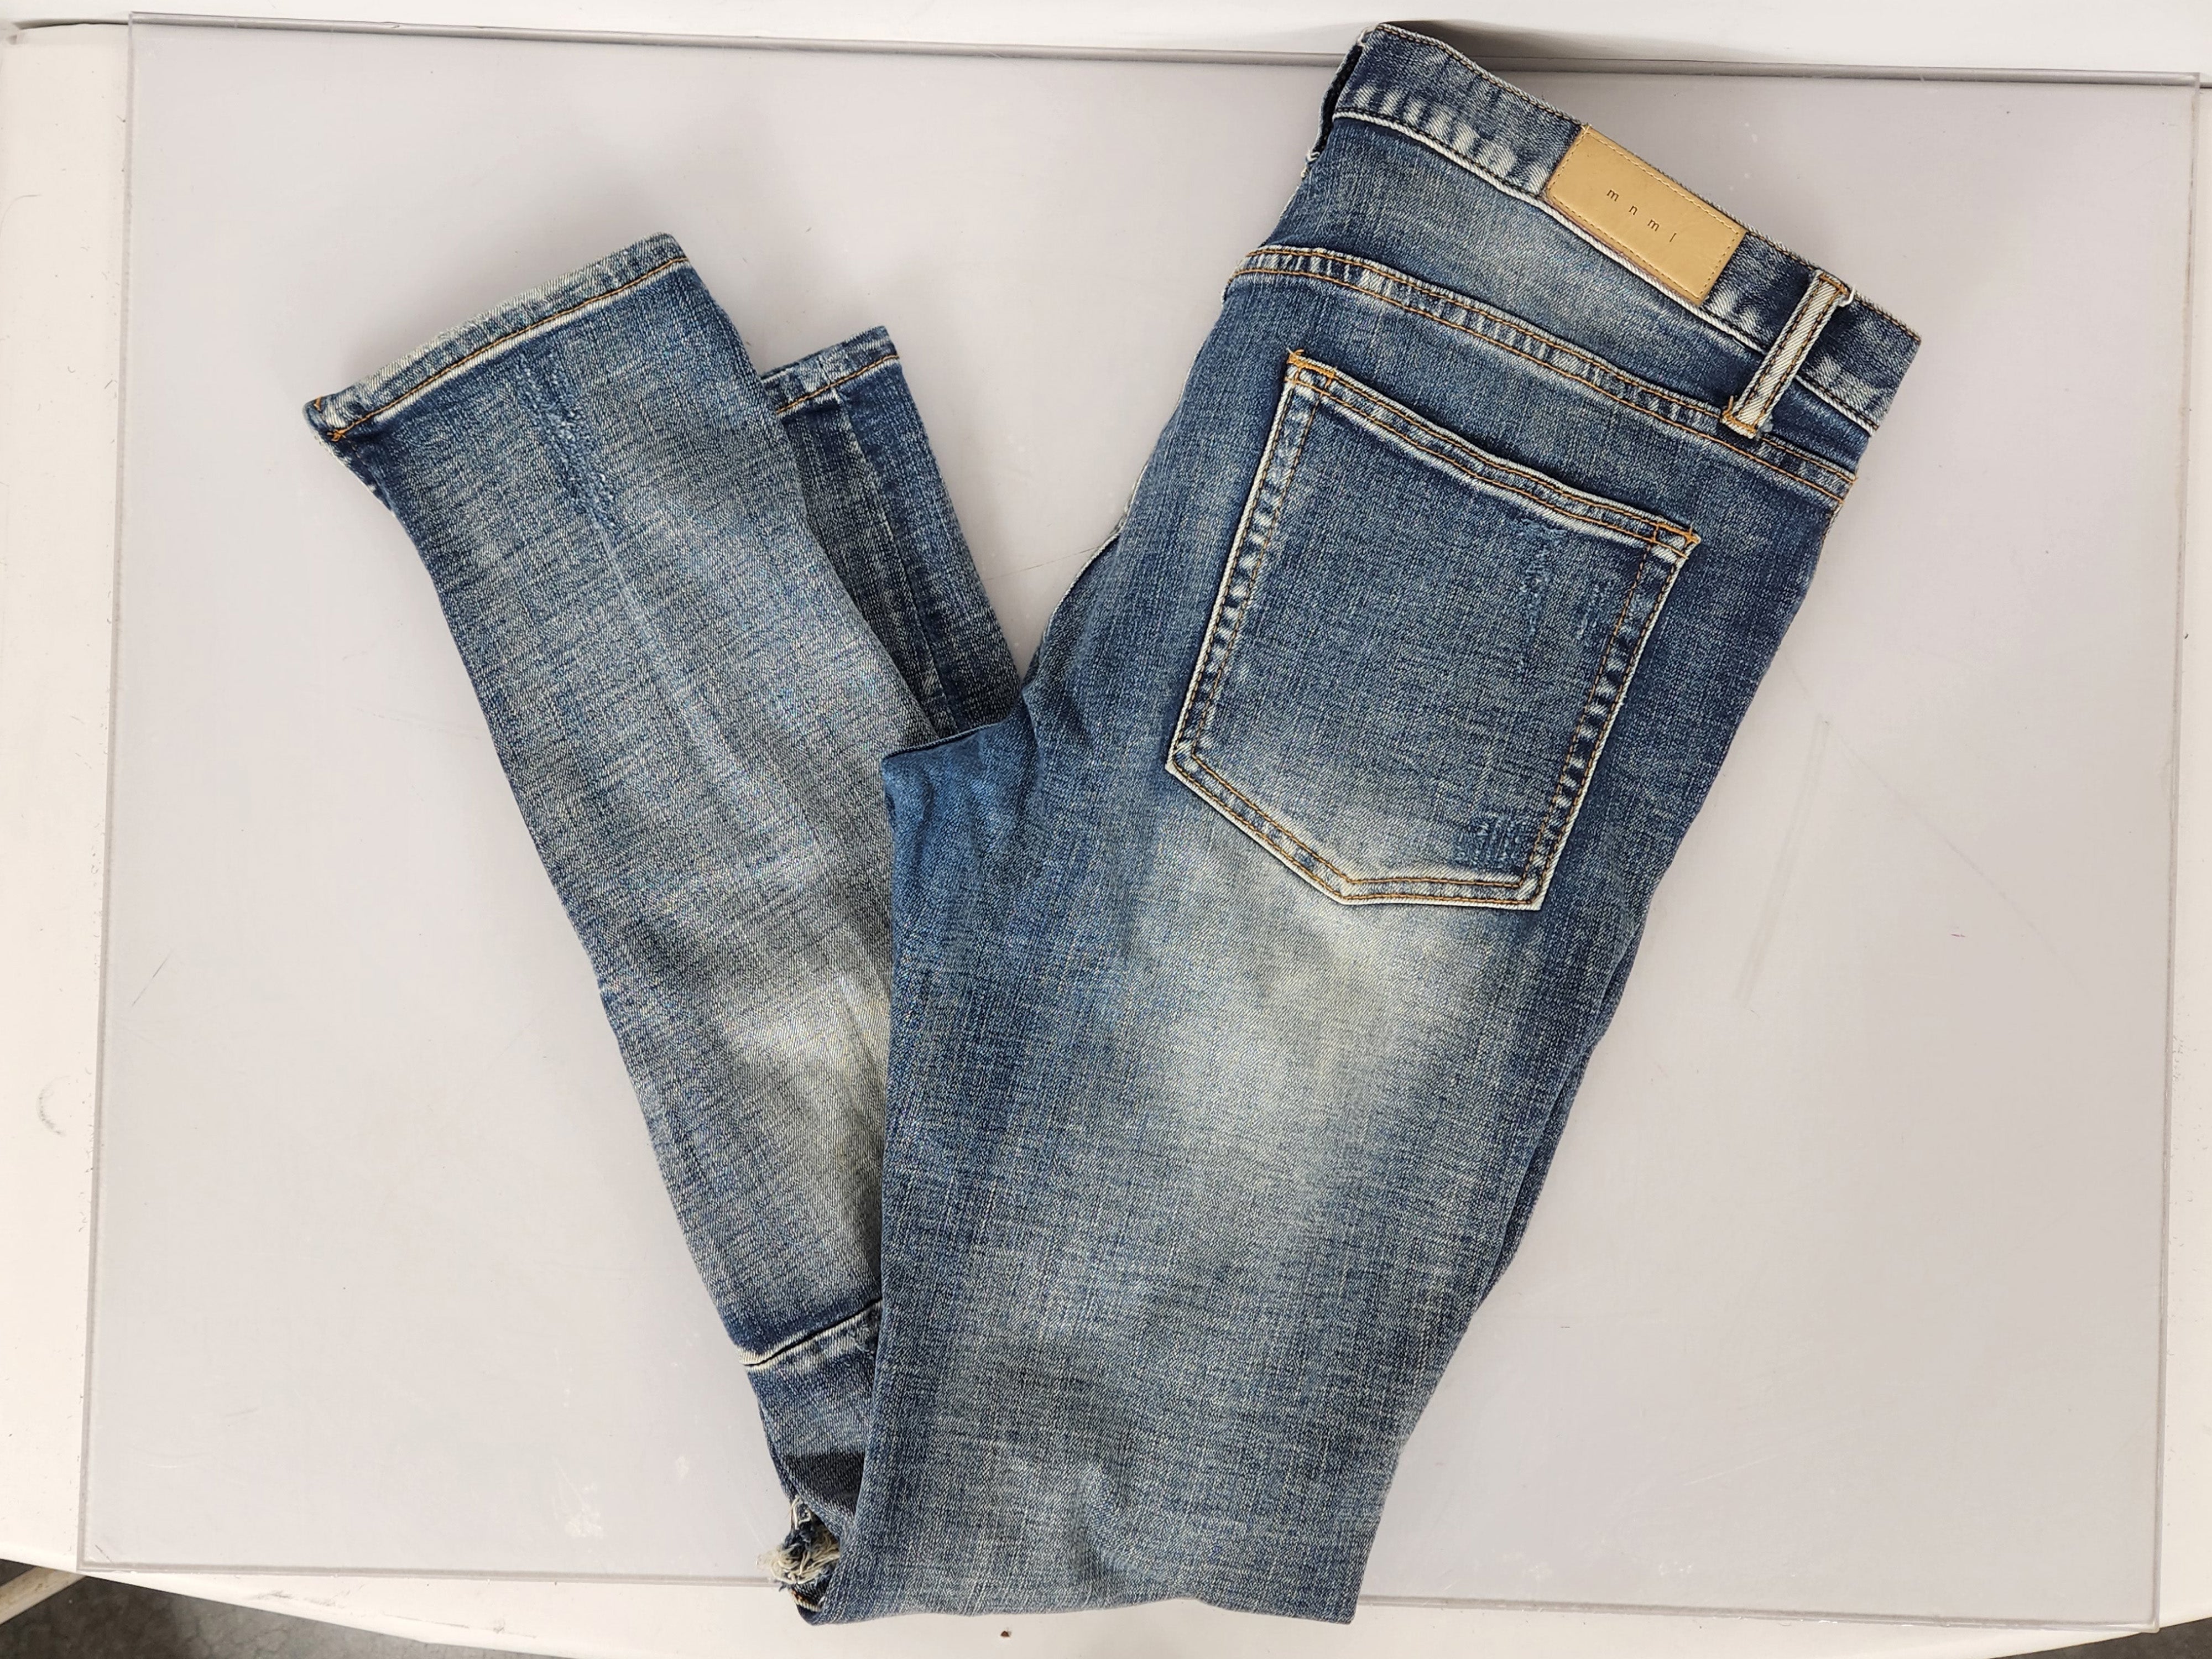 Buy French Crown Rhino Blue Whiskering Wash Mildly Distressed Denim(J200-36)  at Amazon.in